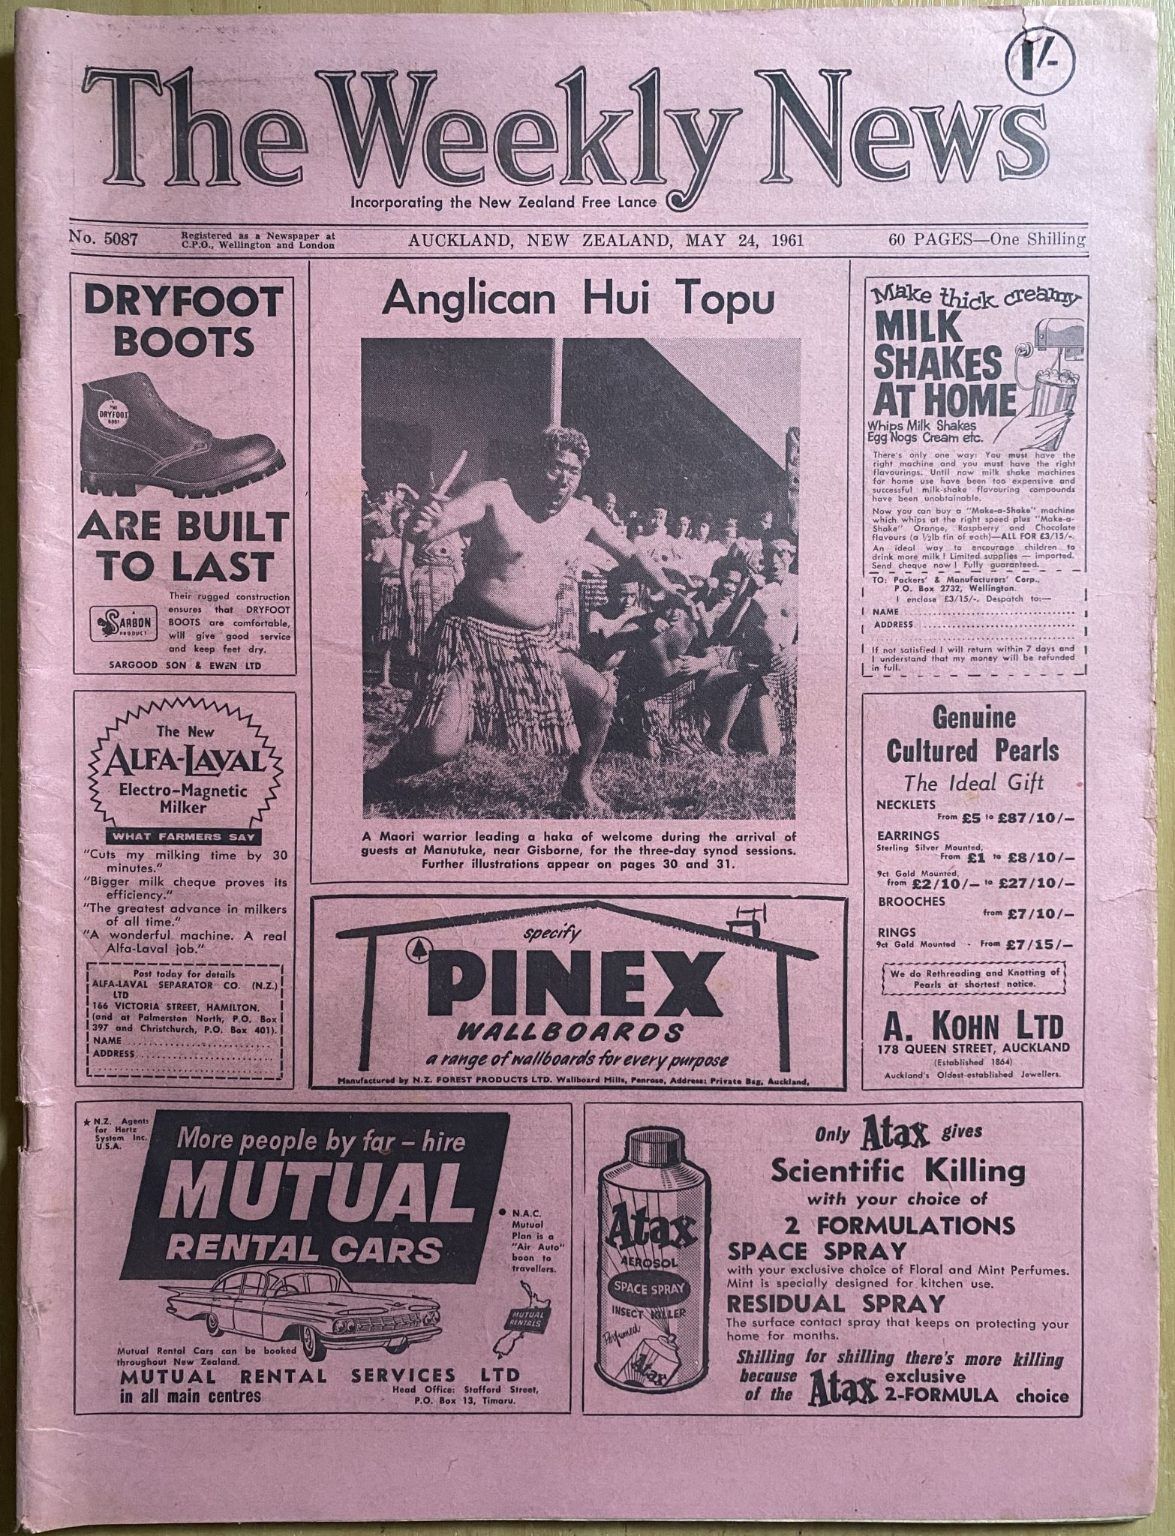 OLD NEWSPAPER: The Weekly News, No. 5087, 24 May 1961